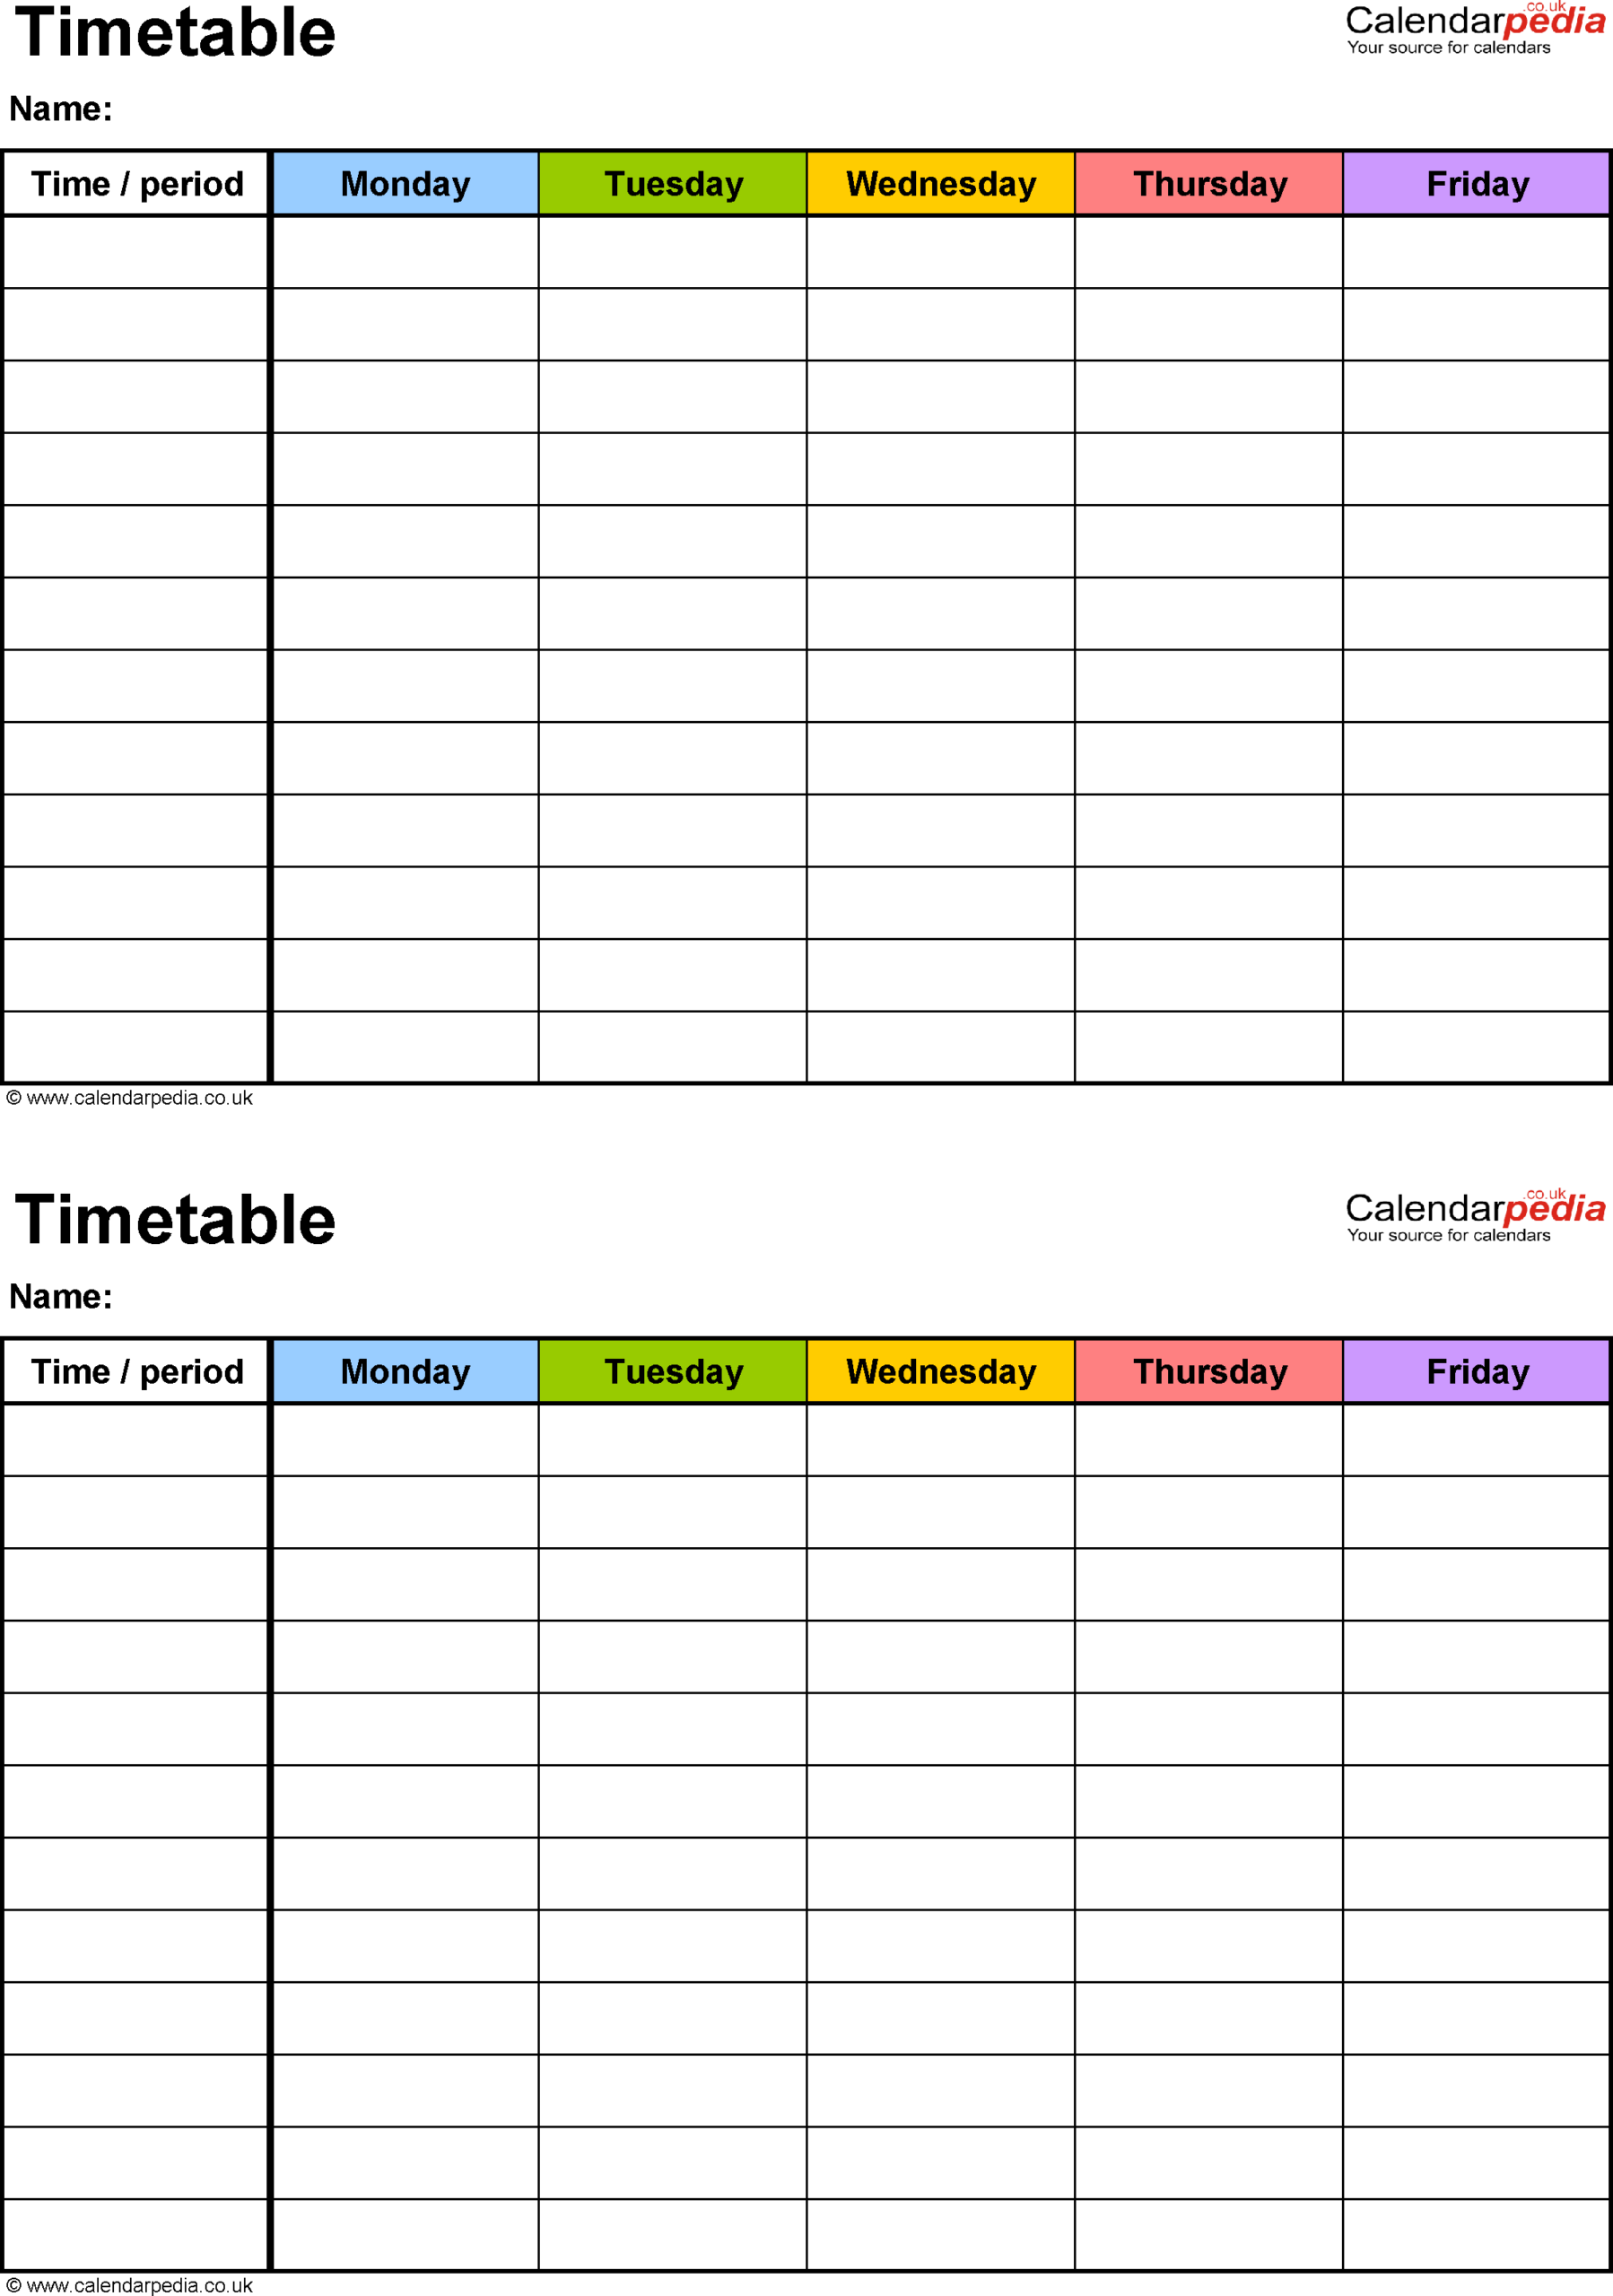 Excel Timetable Template 6: 2 A5 Timetables On One Page